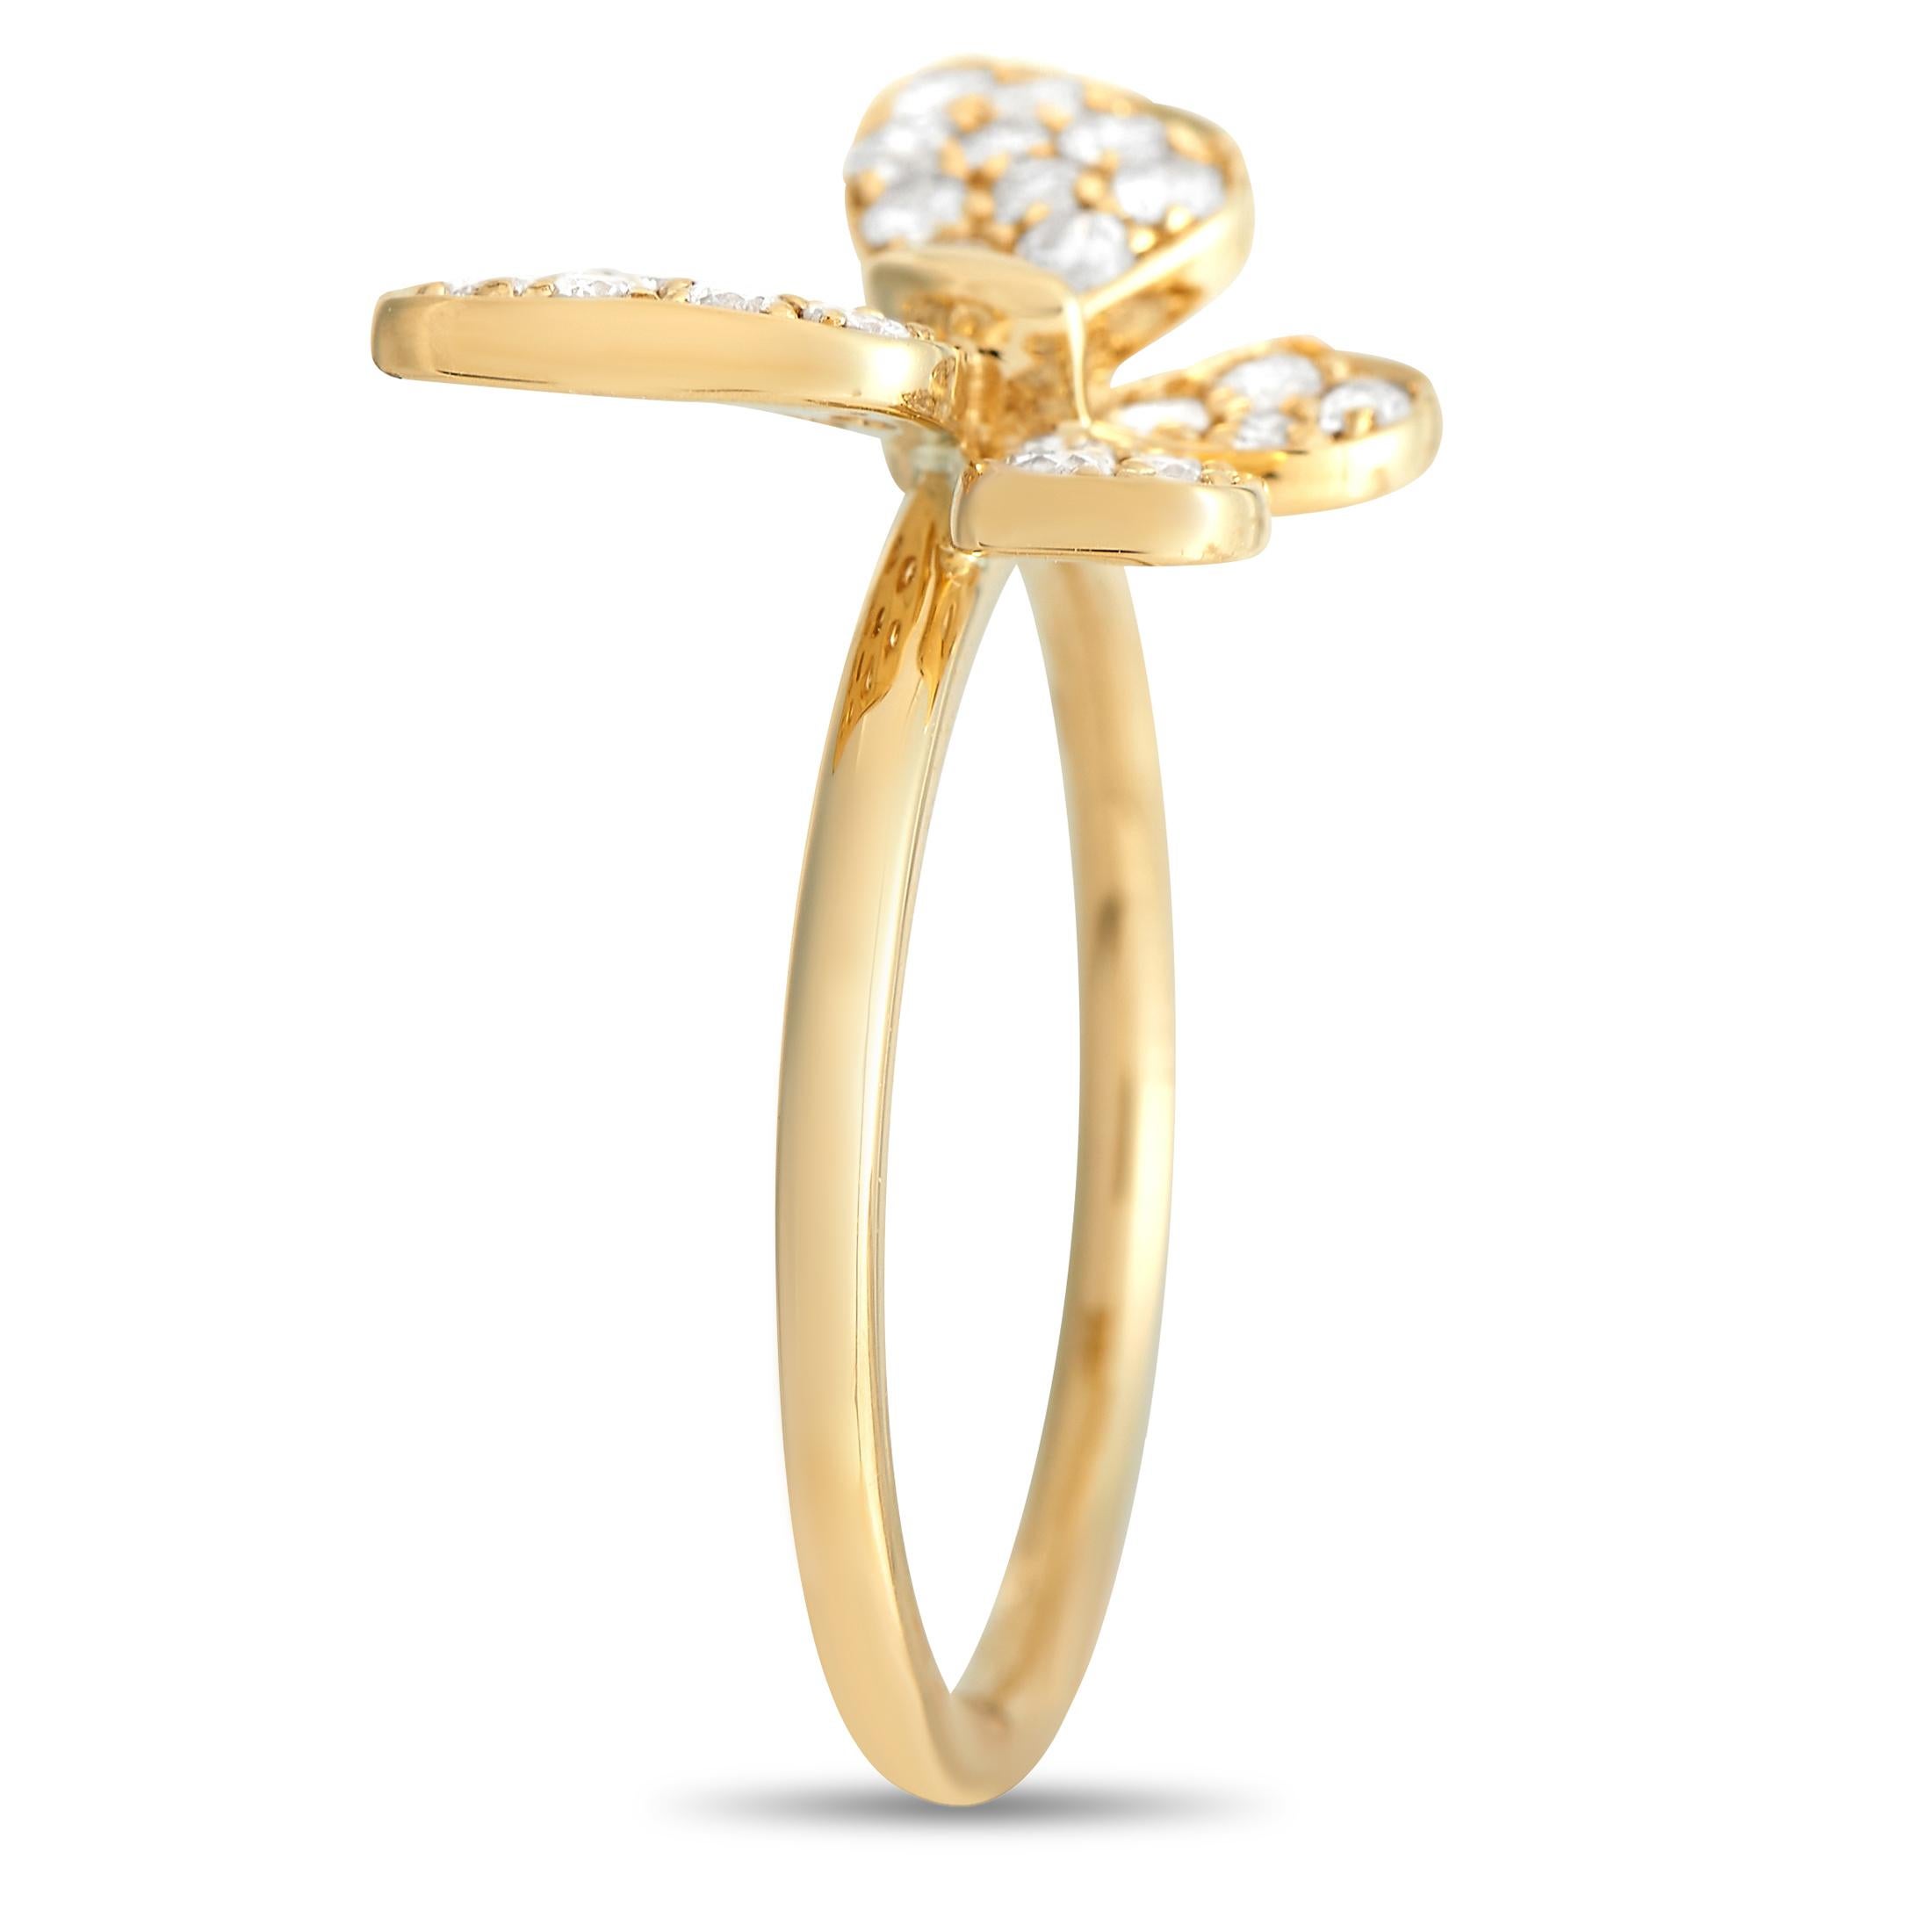 A singular butterfly motif sits at the center of a 2mm wide band on this delicate, dynamic ring. Crafted from lustrous 18K Yellow Gold, it comes to life thanks to sparkling inset diamonds with a total weight of 0.46 carats. A slight 3mm top height